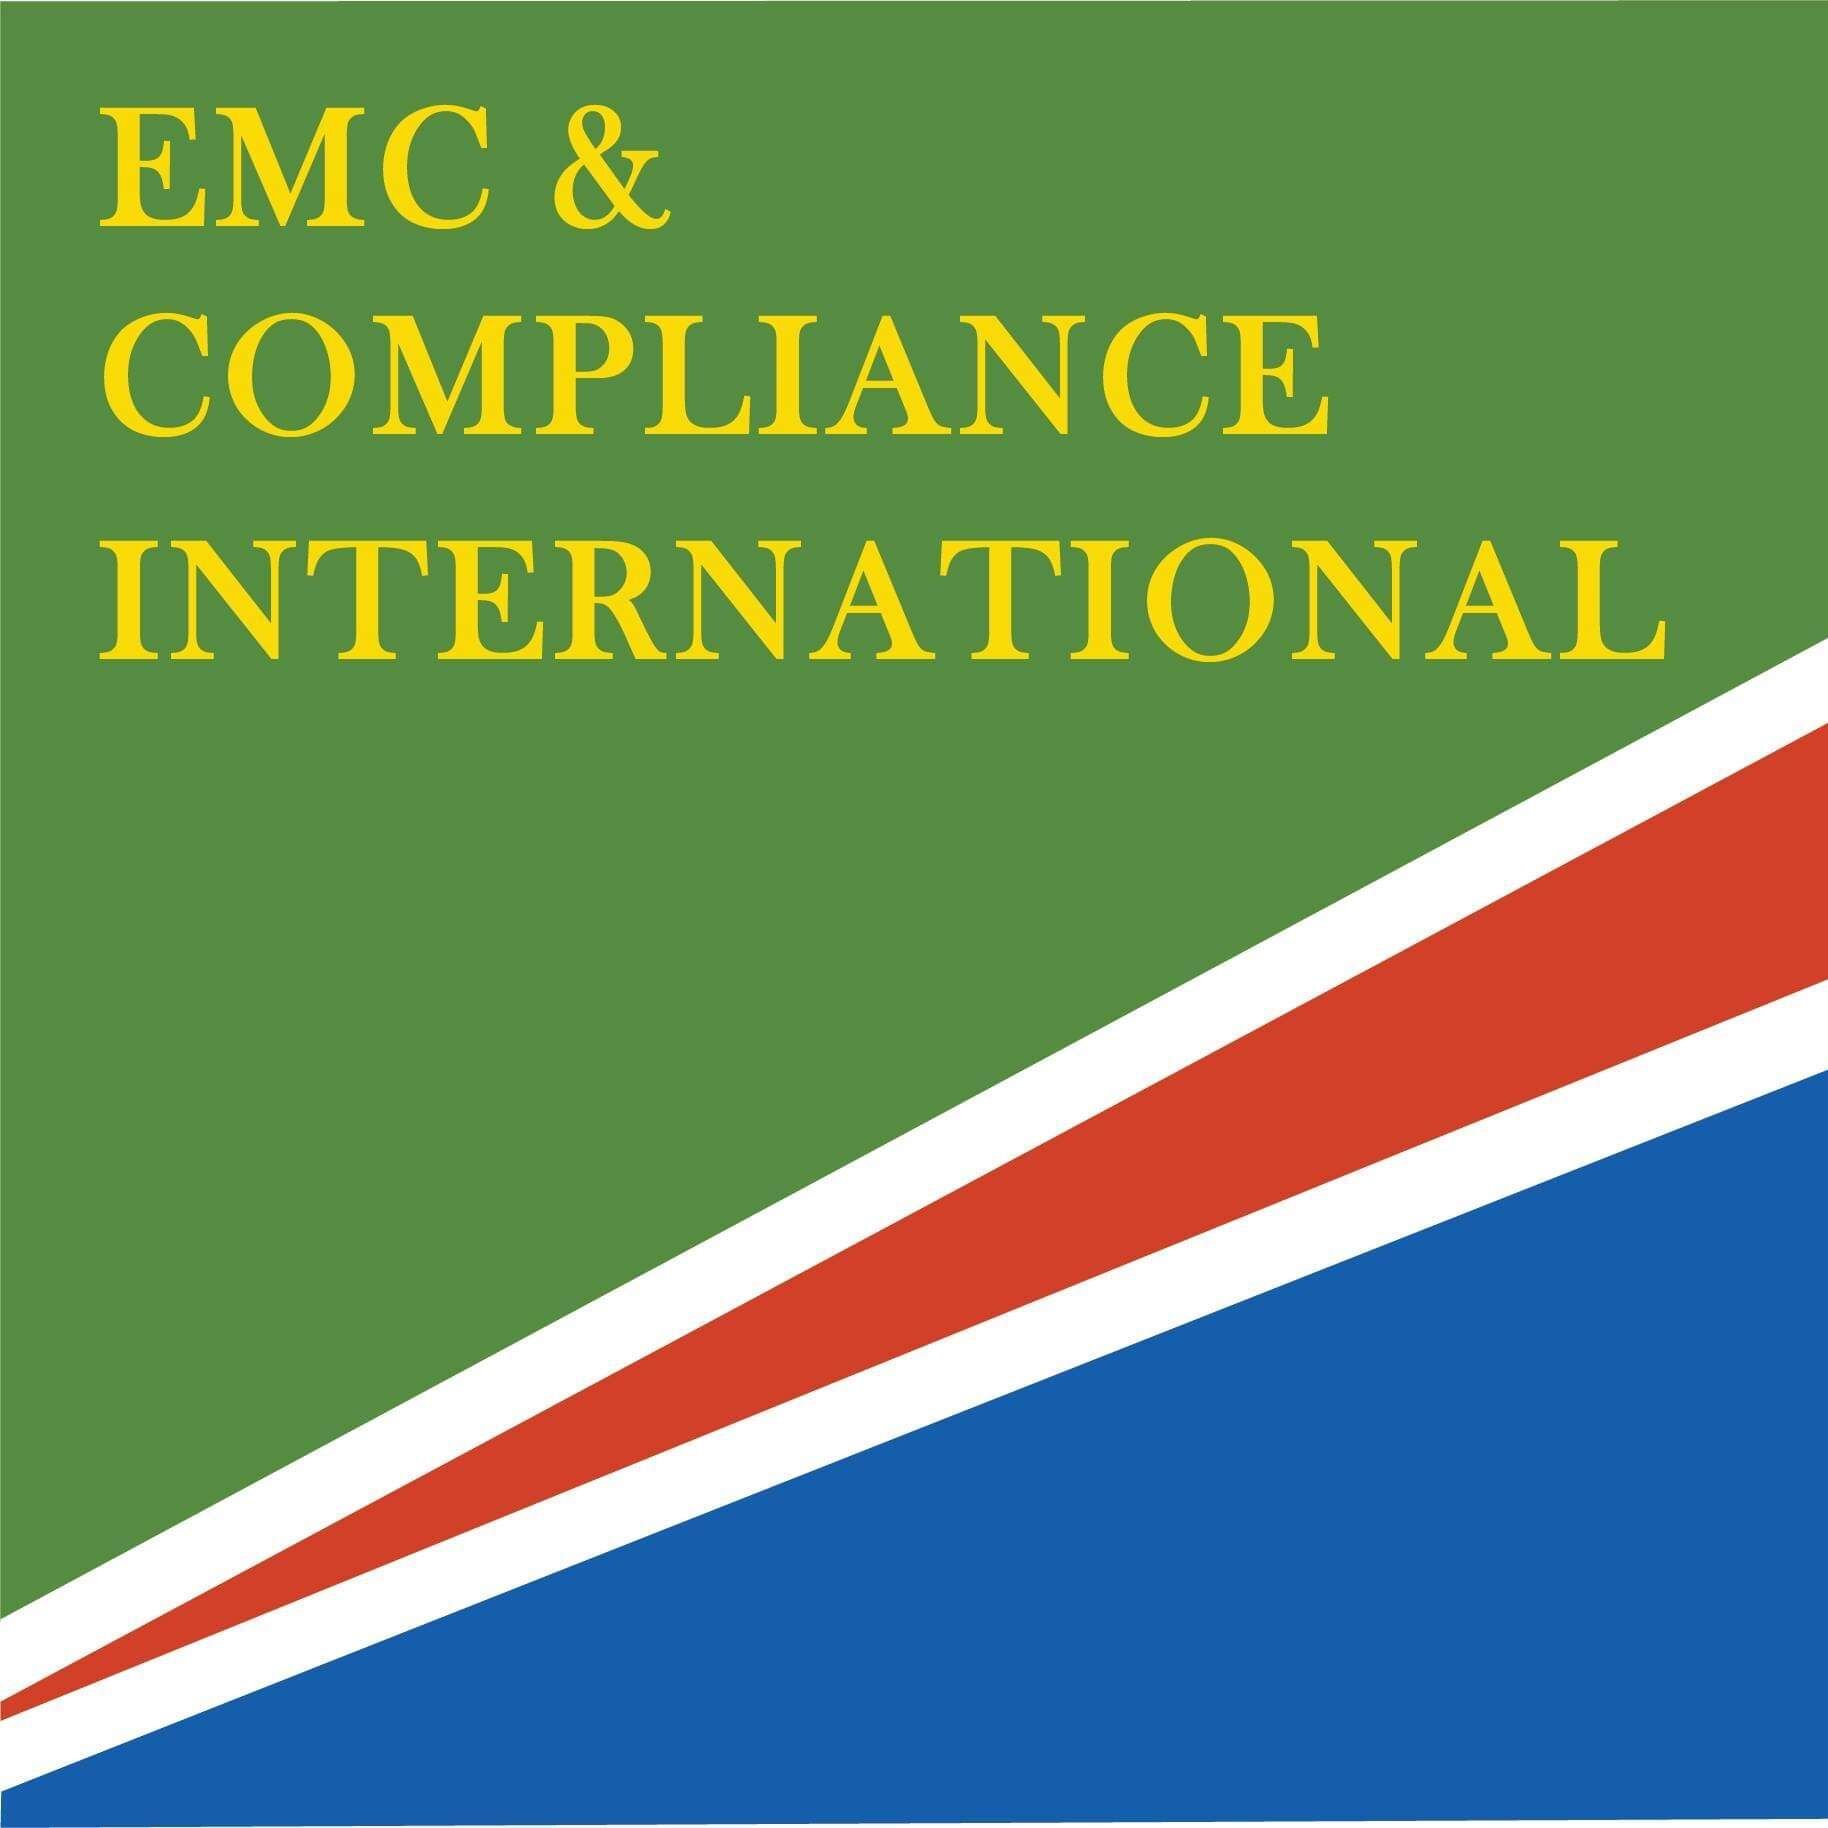 One week till EMC & Compliance International opens for visitors